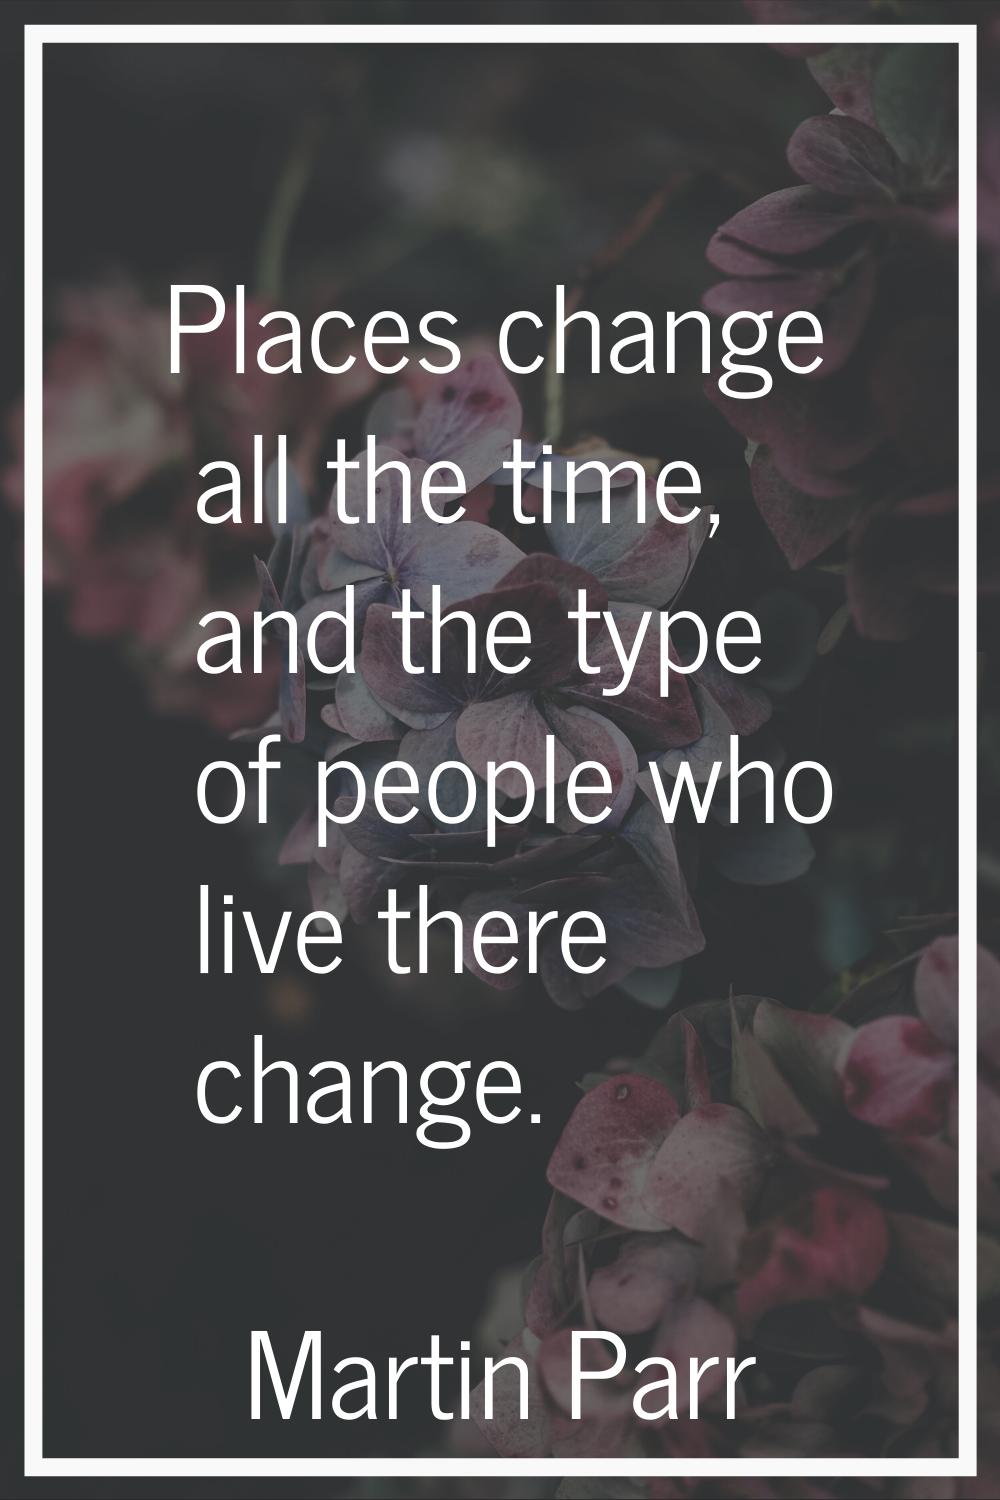 Places change all the time, and the type of people who live there change.